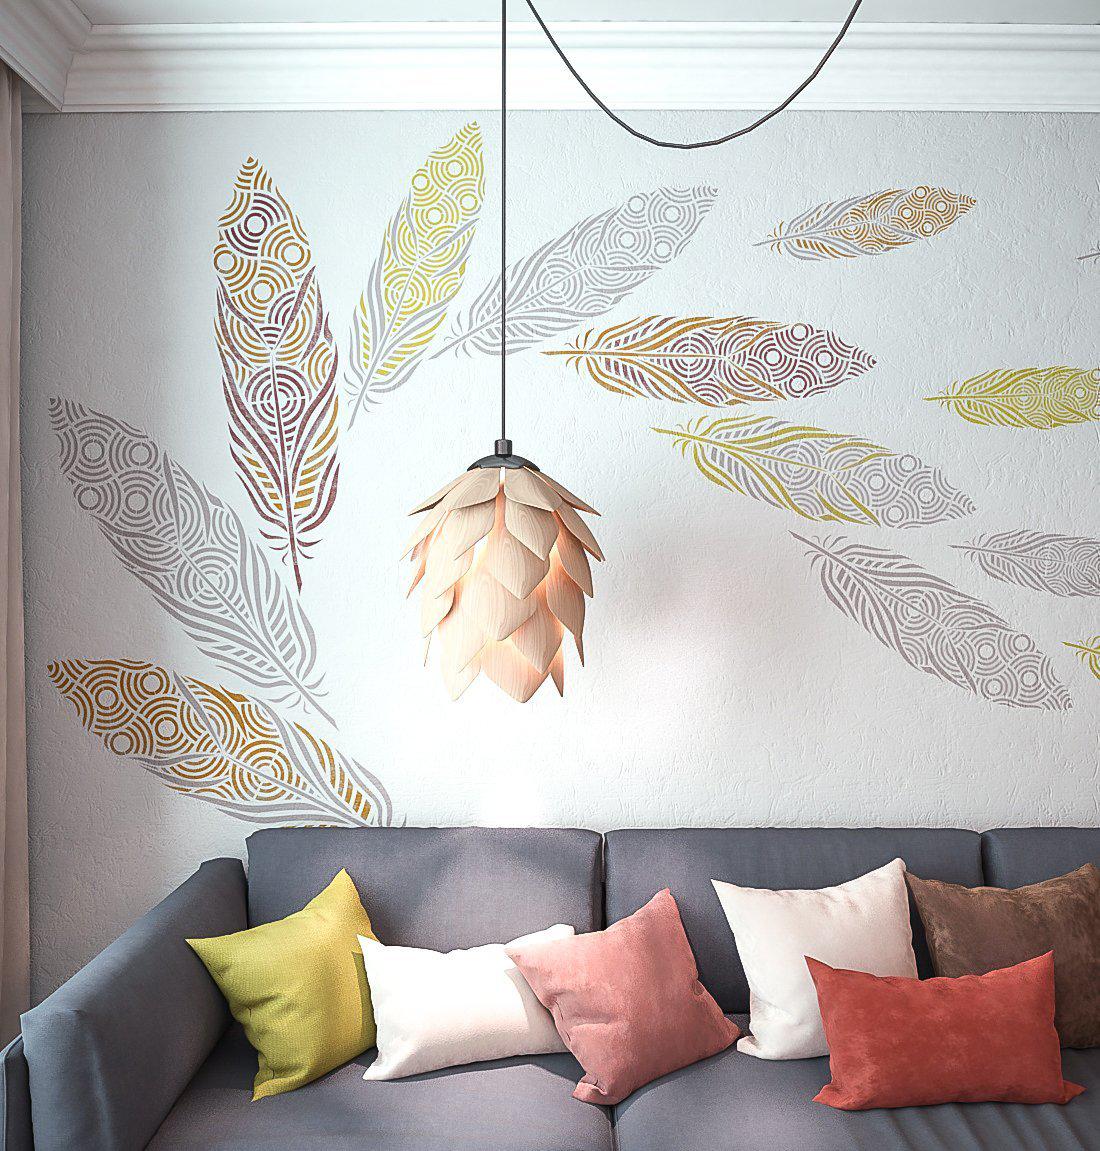 How to Apply Stencil Design, Stencil wall Painting, Wall stencil design  for living room